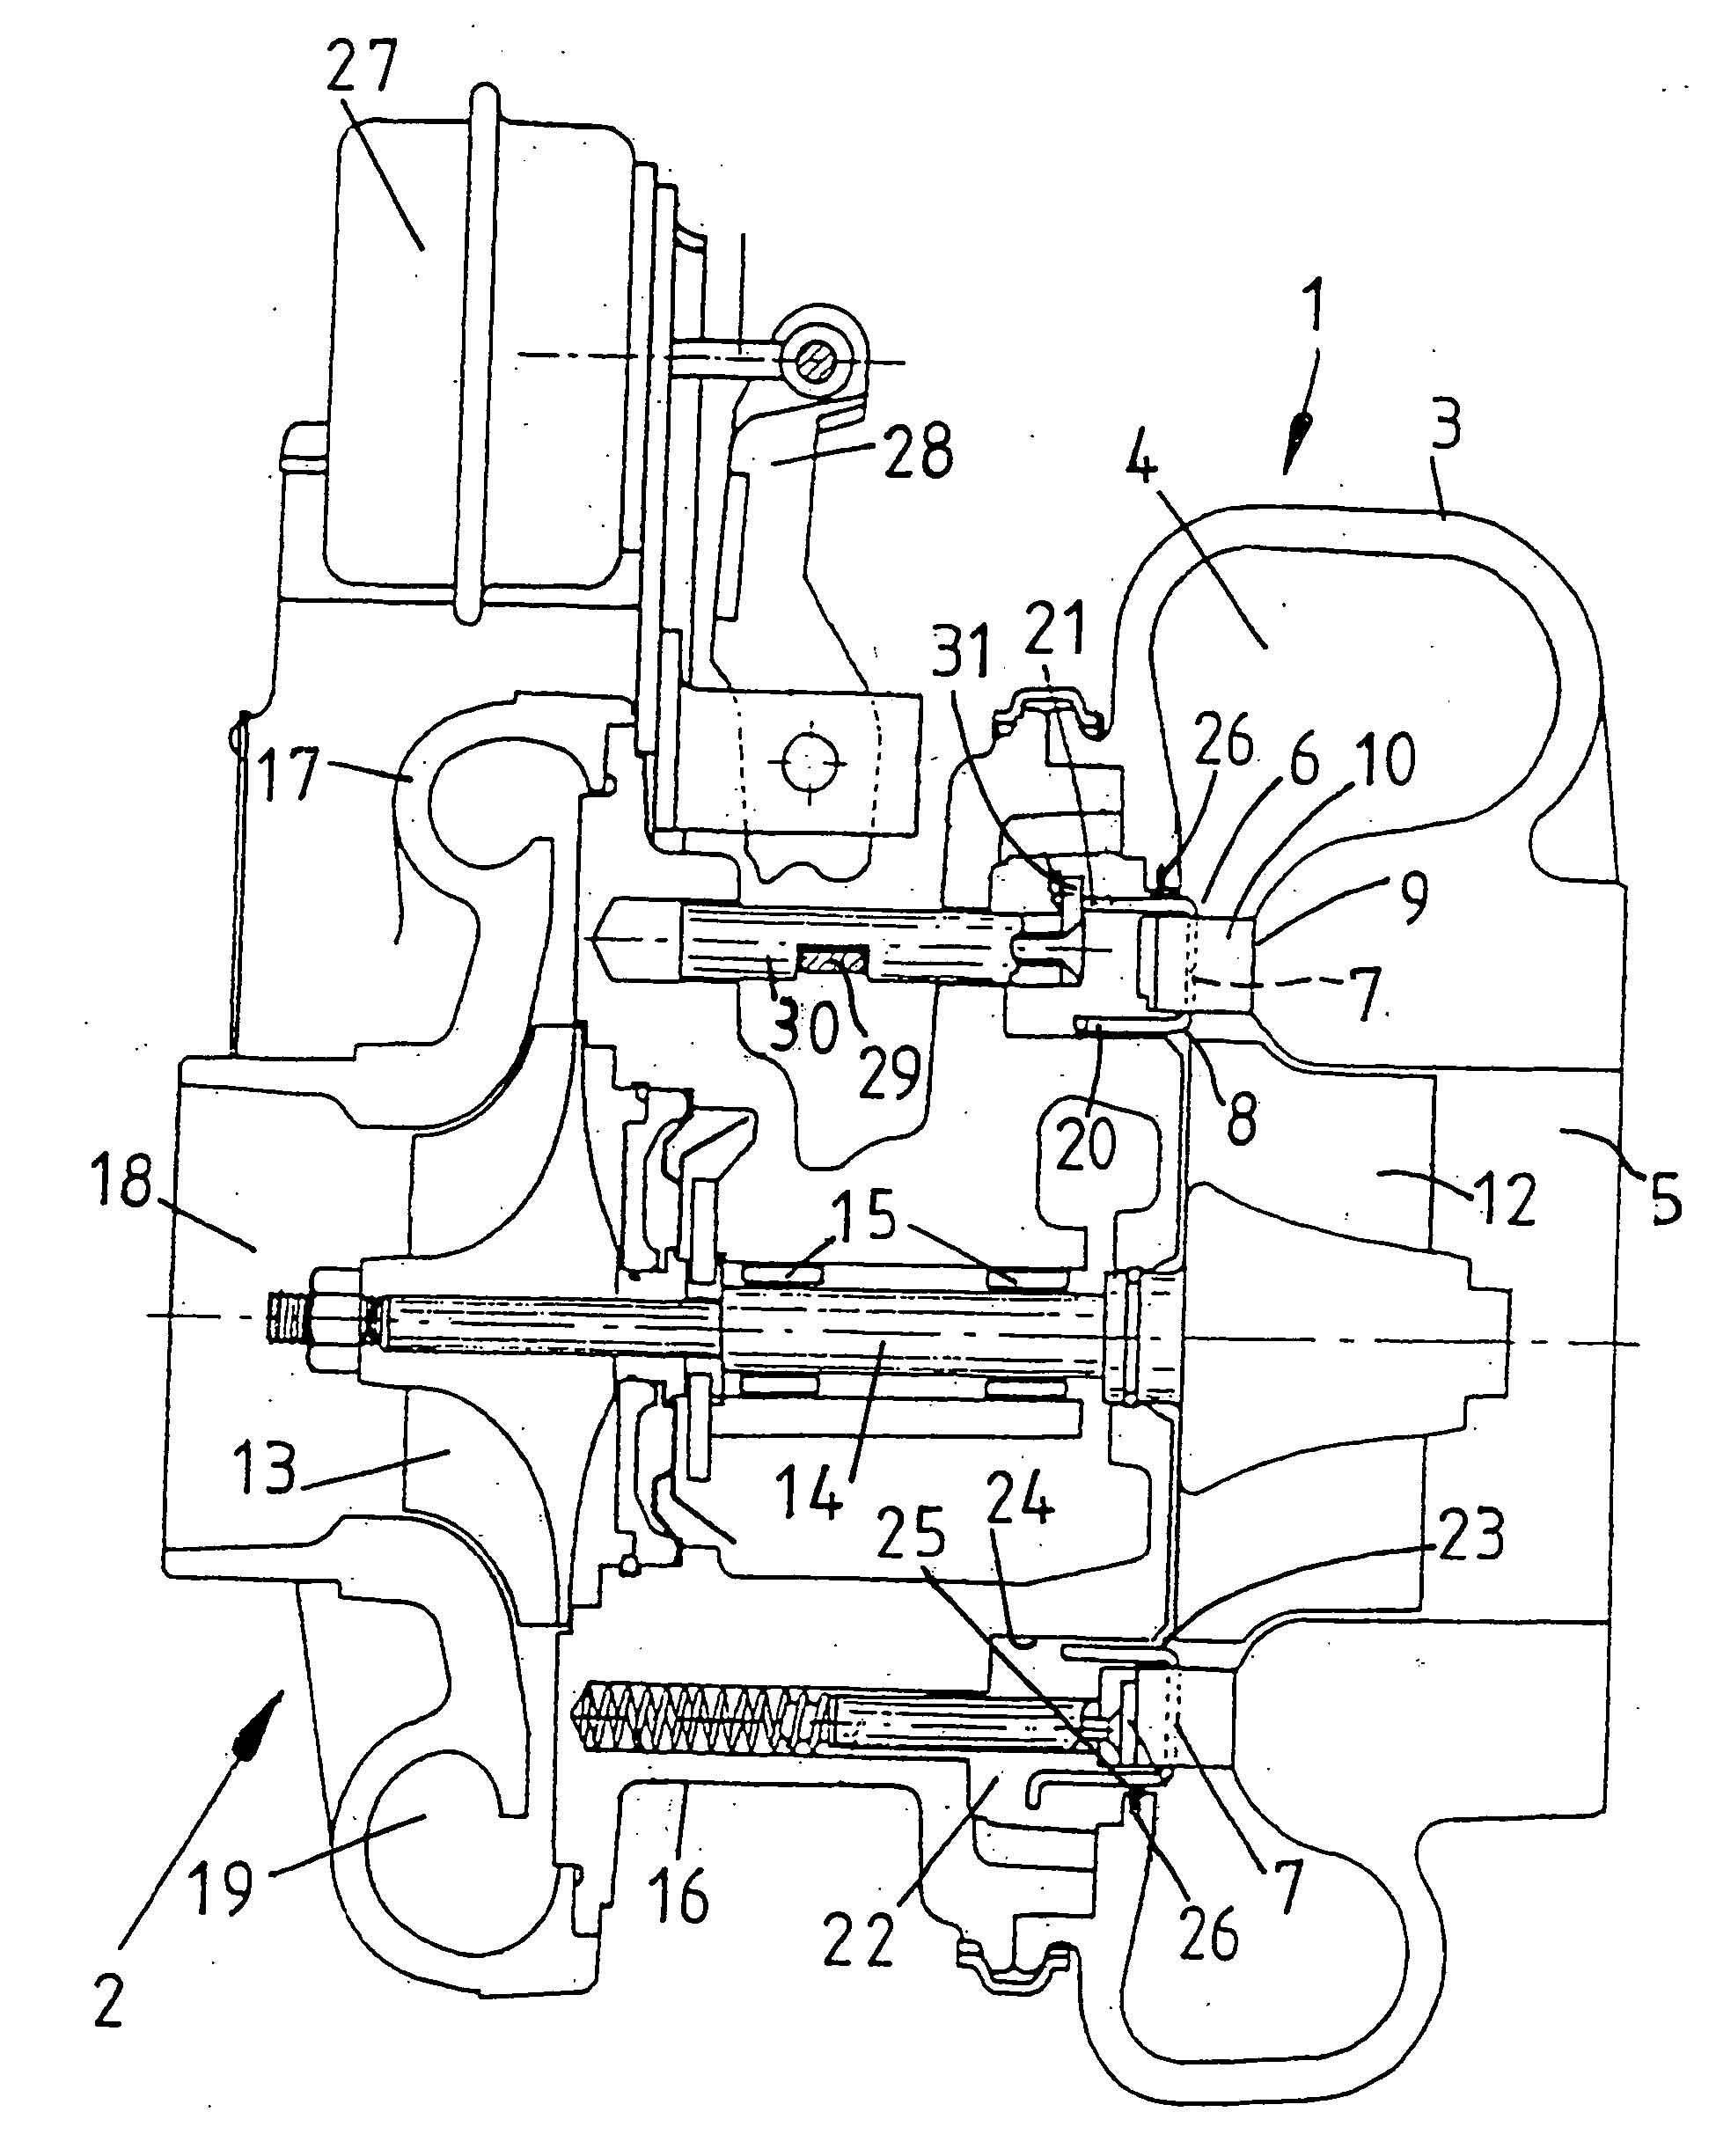 Method of controlling the exhaust gas temperature for after-treatment systems on a diesel engine using a variable geometry turbine